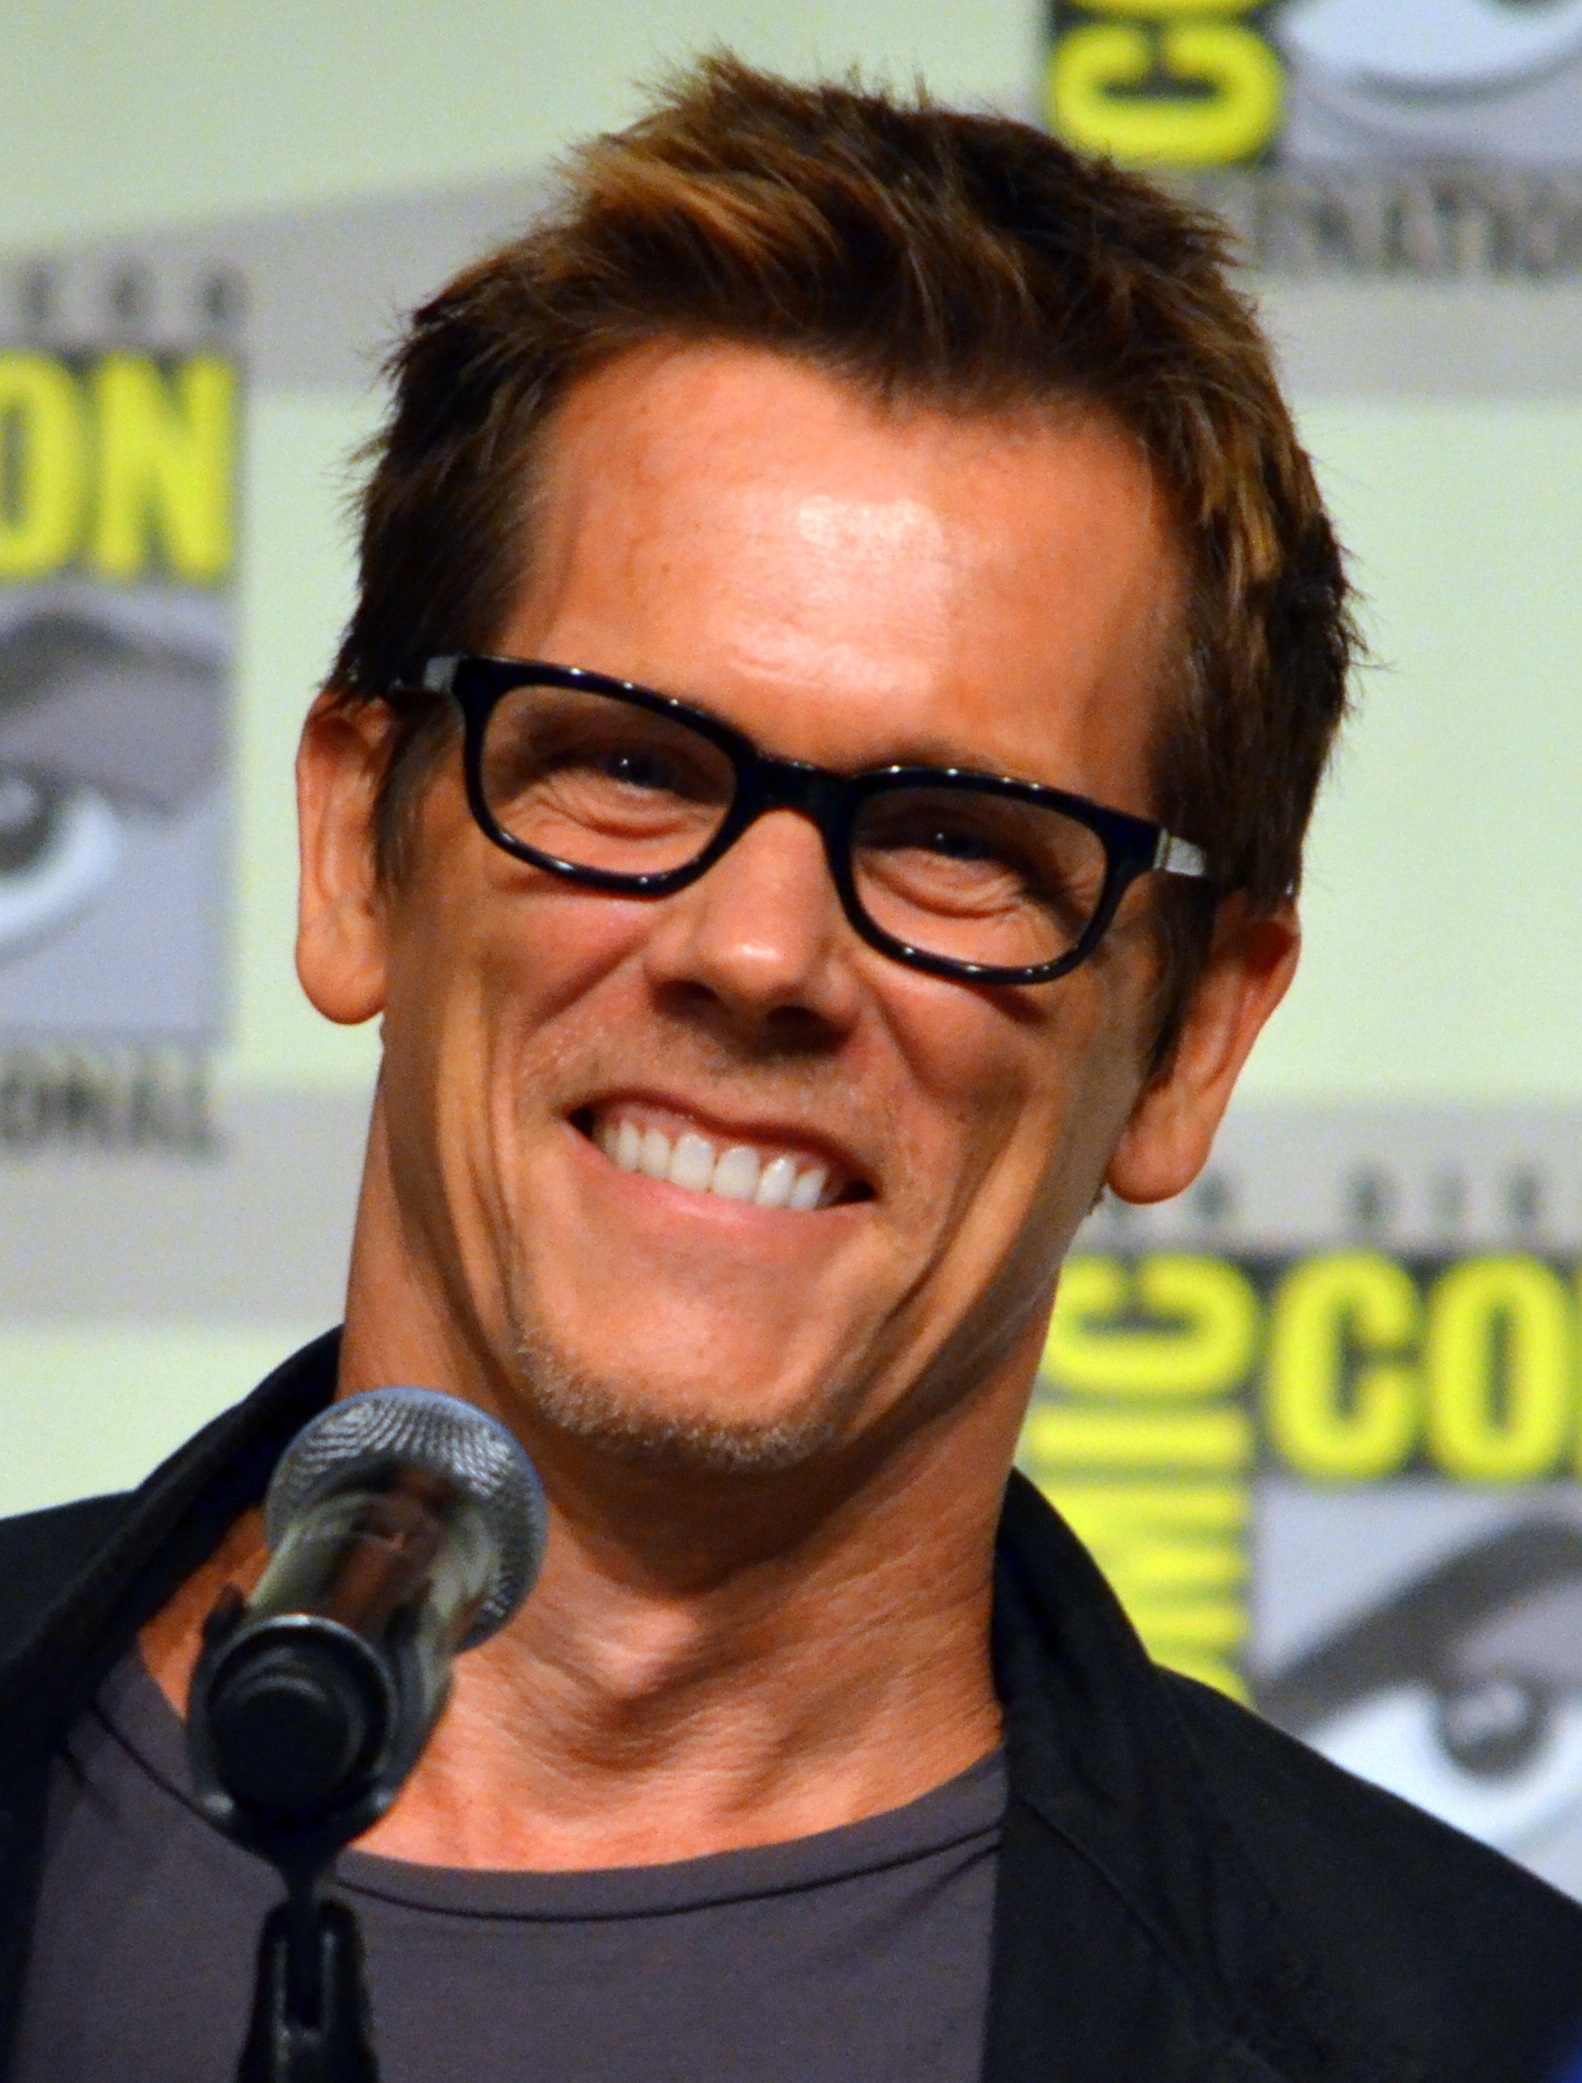 Kevin Bacon | Robot Chicken Wiki | FANDOM powered by Wikia